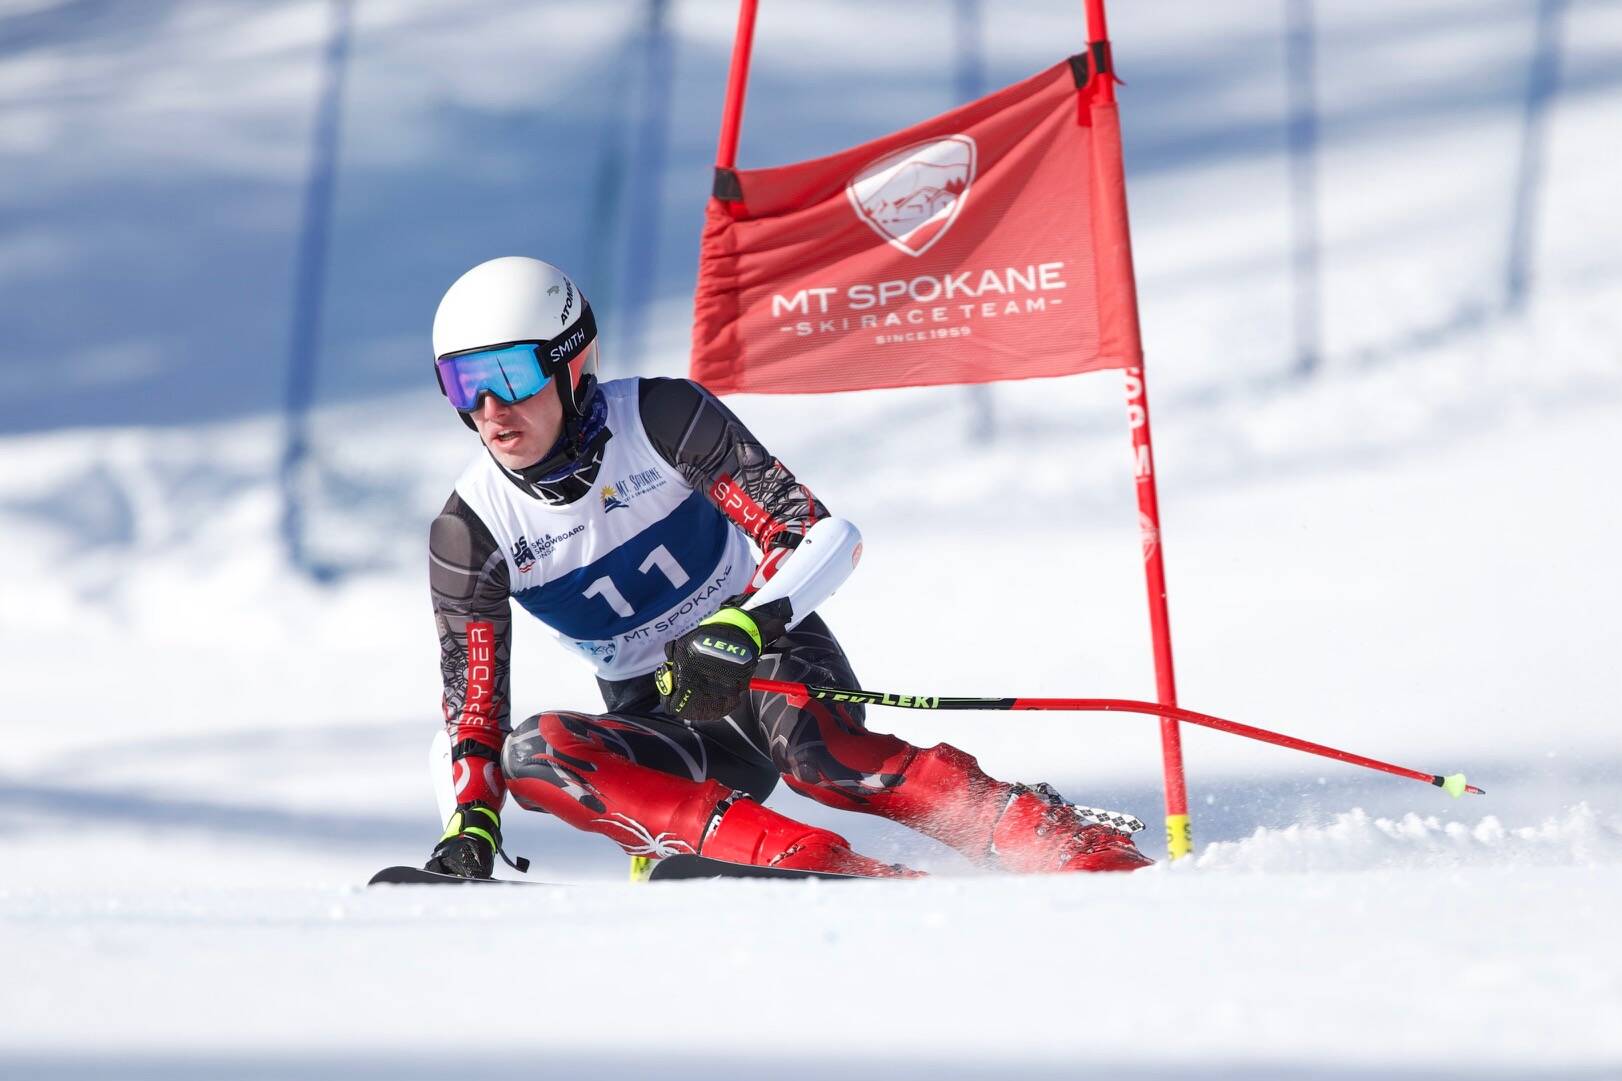 Mercer Island High School senior Oliver Loeser tears it up during a ski racing competition. Photo courtesy of Robert Paek